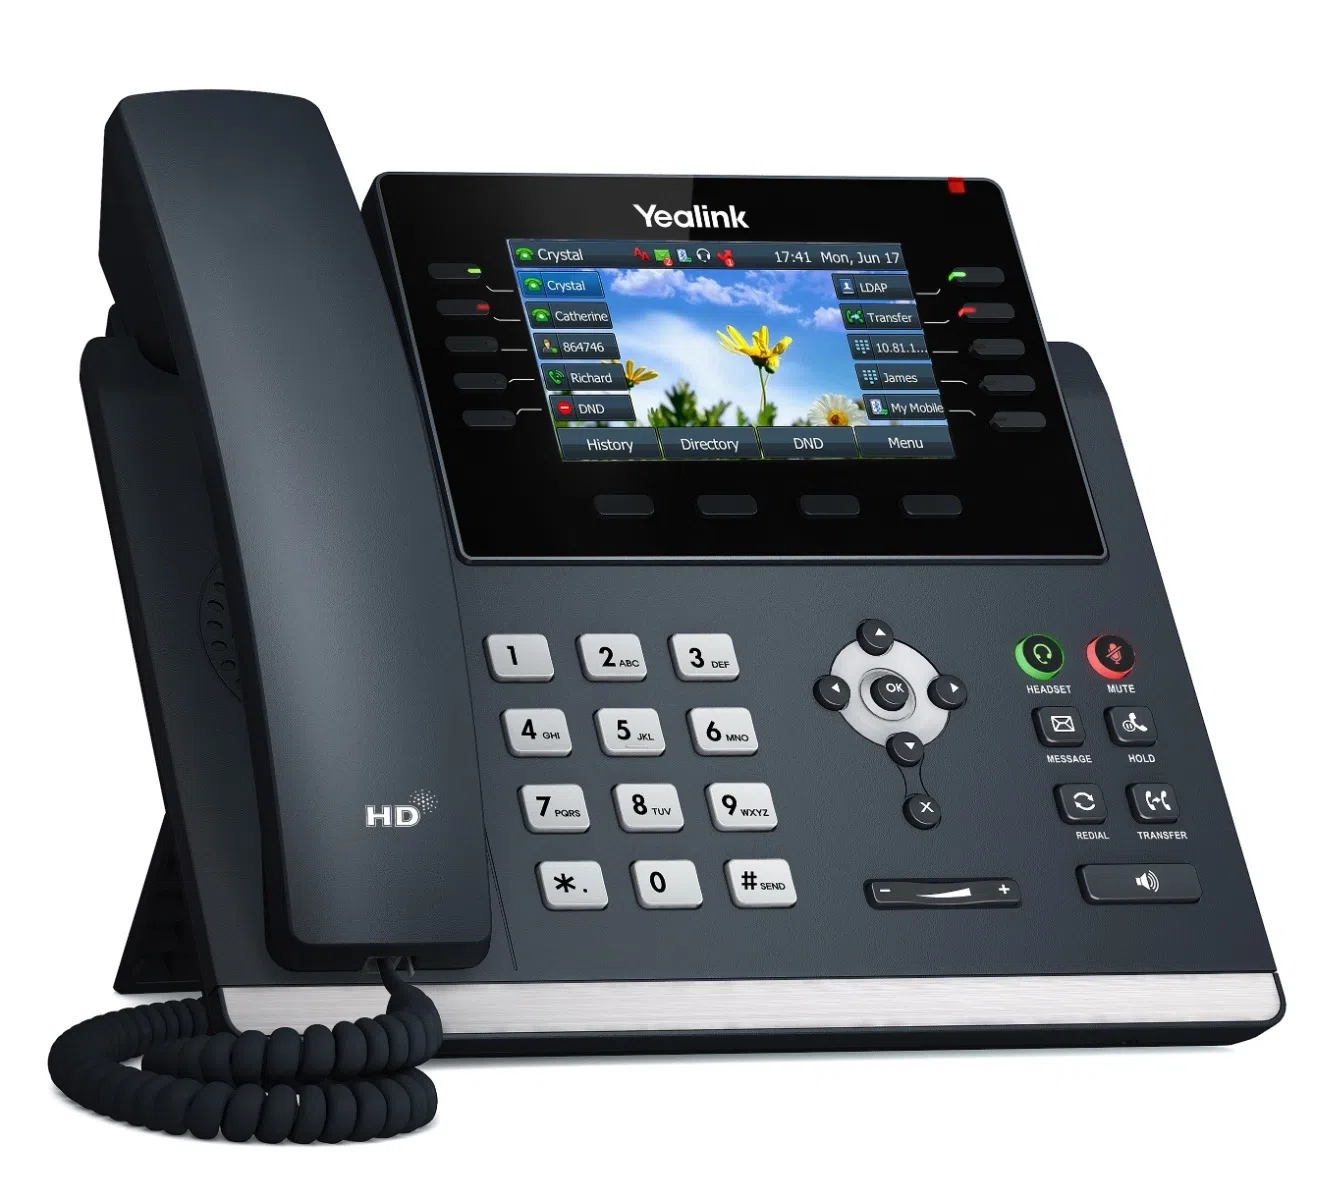 Can the Yealink SIP-T46U IP phone be mounted on the wall?